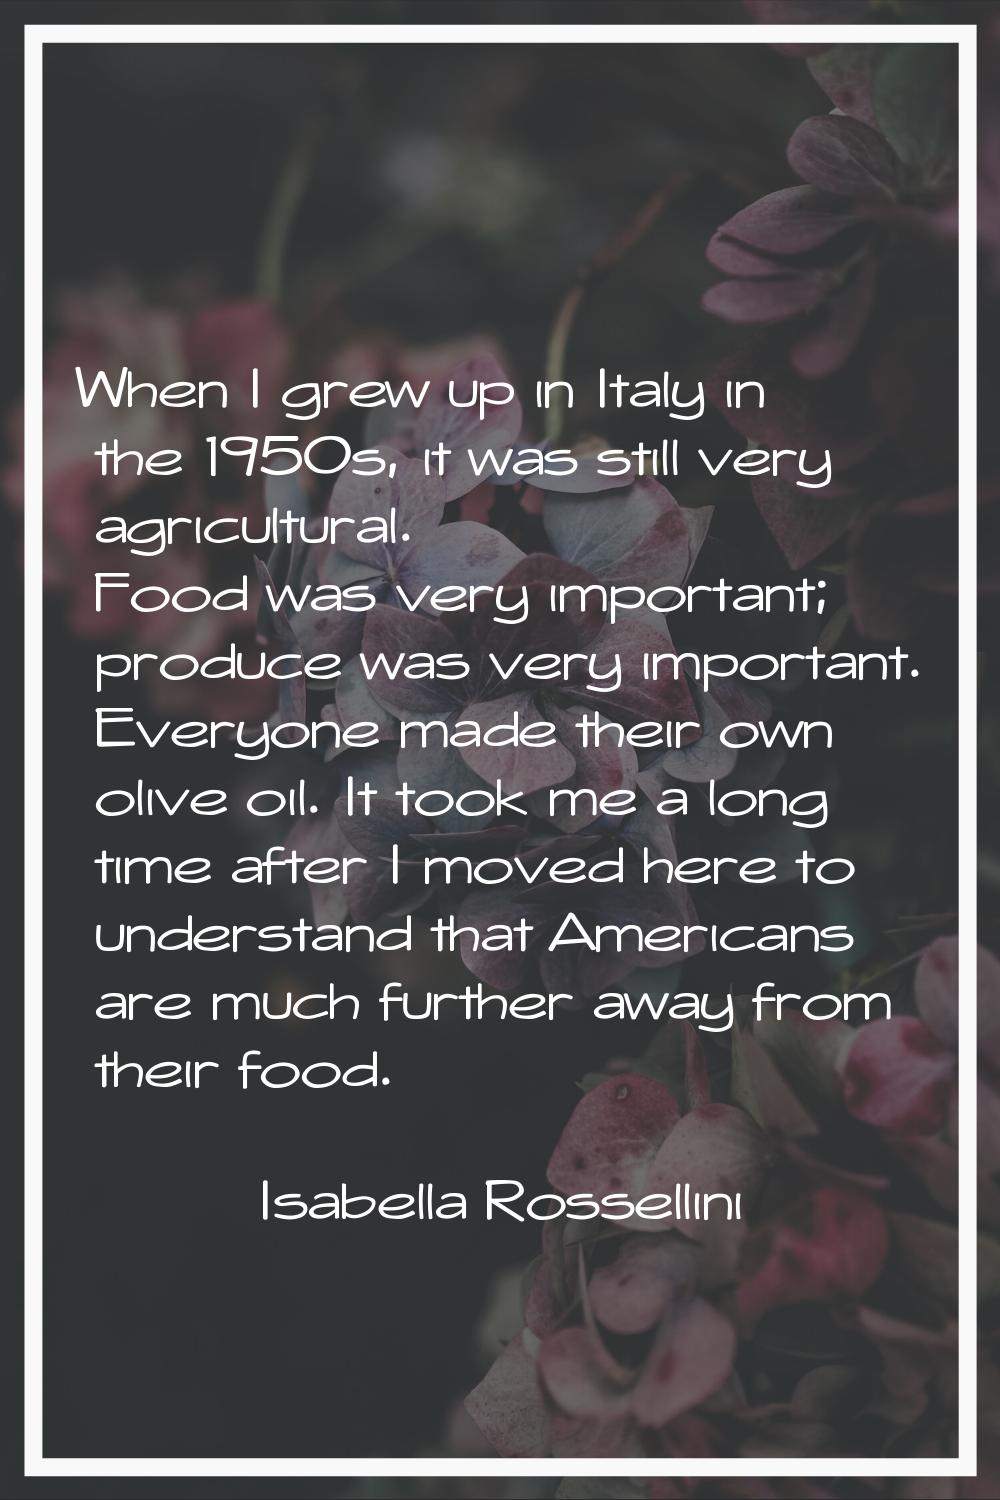 When I grew up in Italy in the 1950s, it was still very agricultural. Food was very important; prod